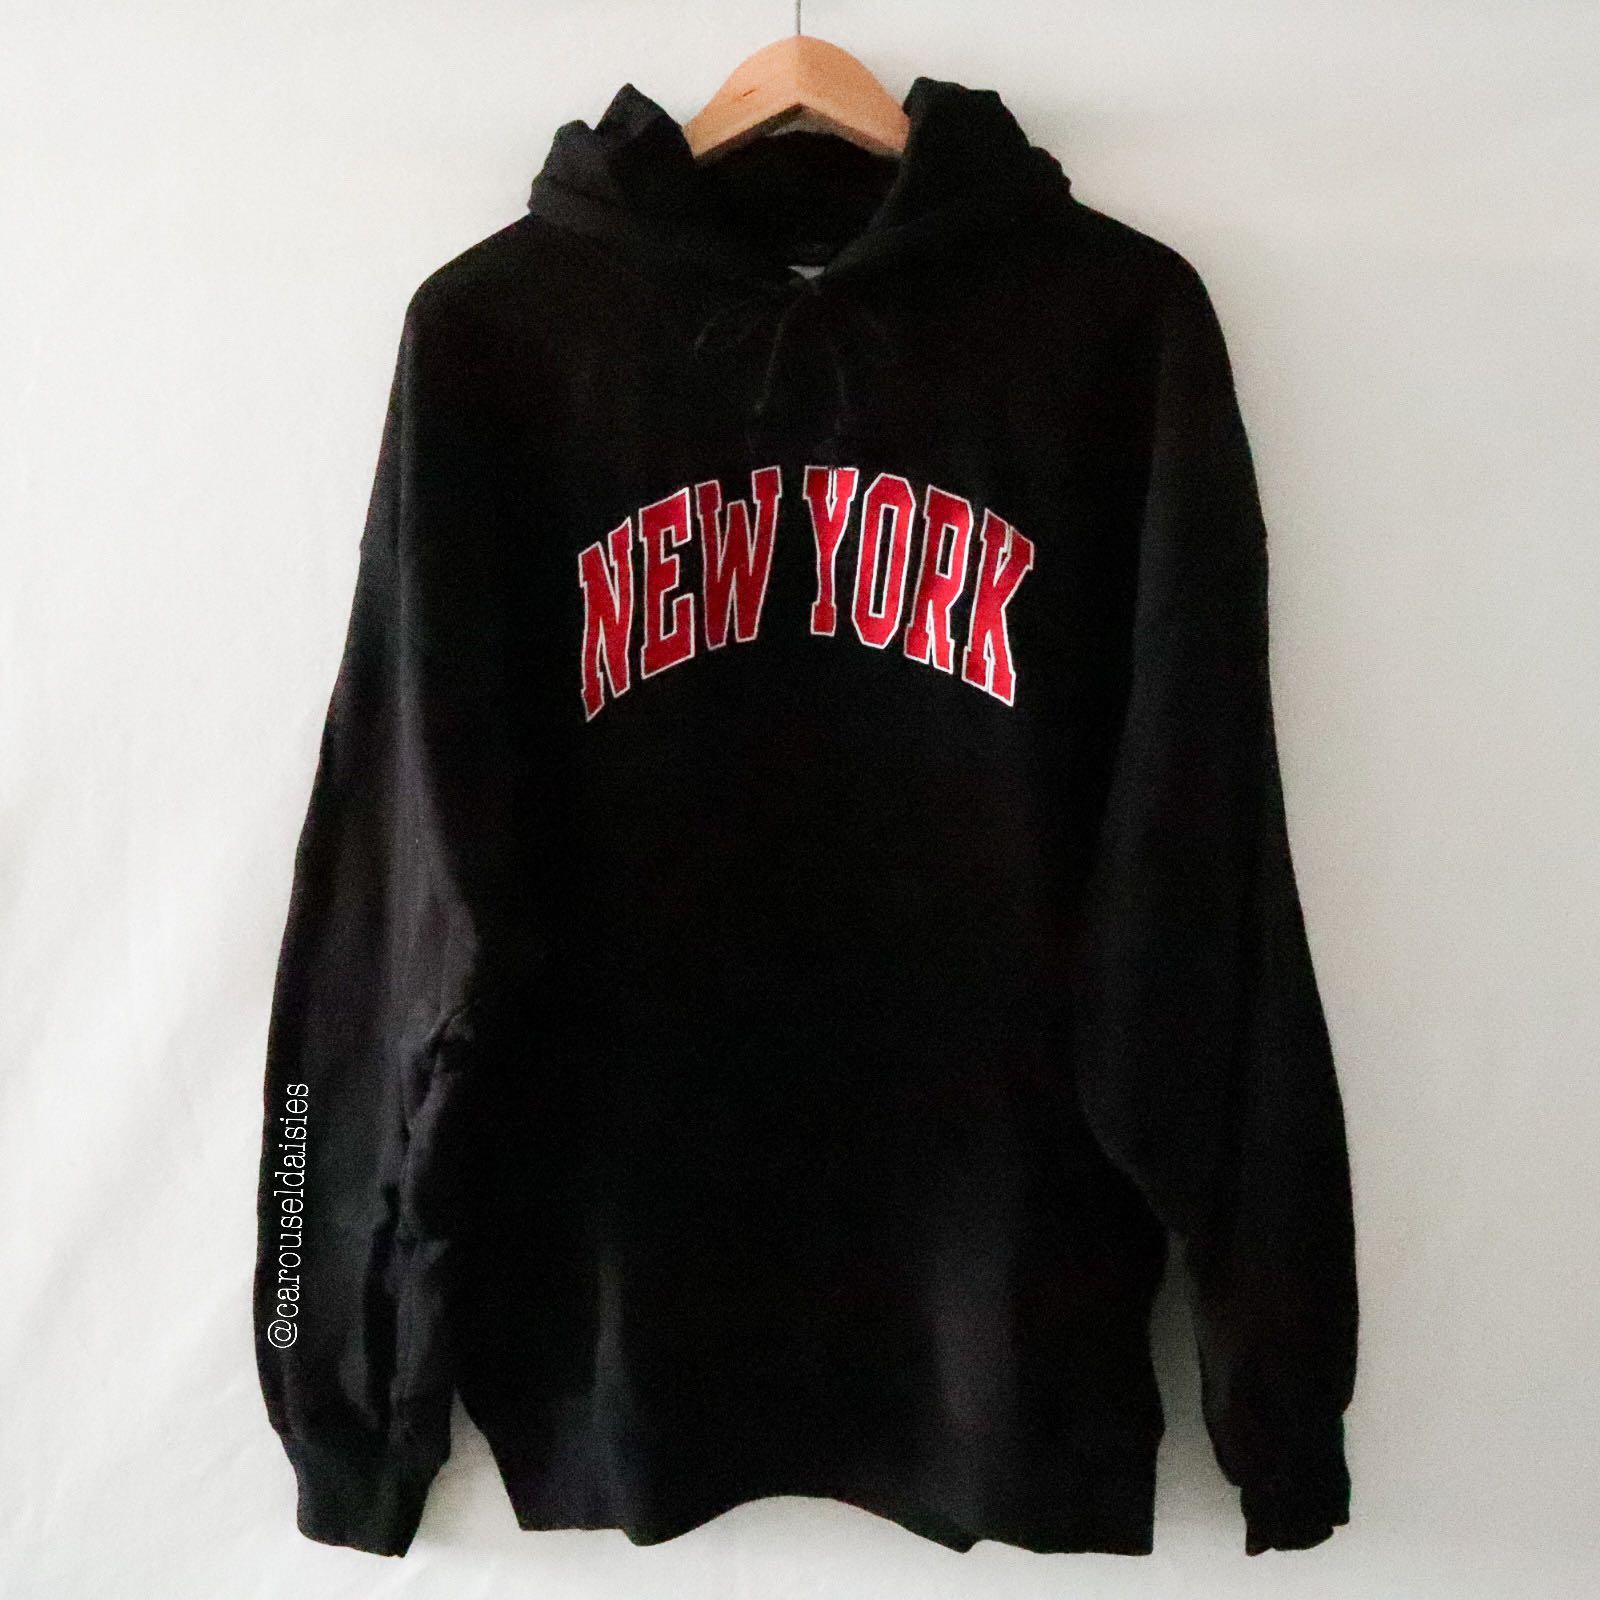 Christy I'll Meet You in New York Hoodie Black